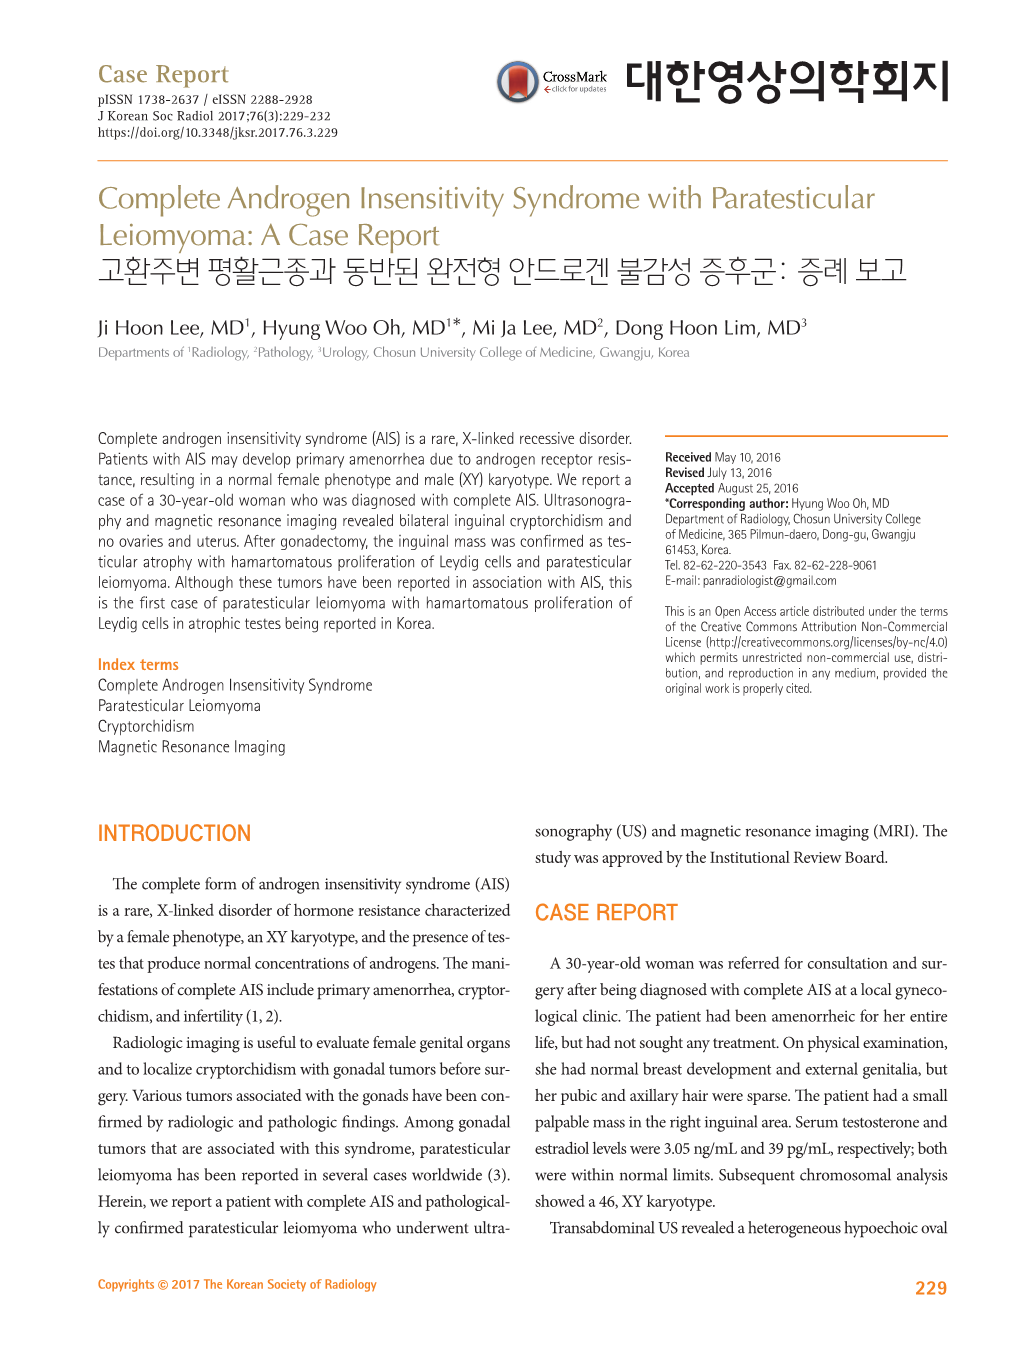 Complete Androgen Insensitivity Syndrome with Paratesticular Leiomyoma: a Case Report 고환주변 평활근종과 동반된 완전형 안드로겐 불감성 증후군: 증례 보고